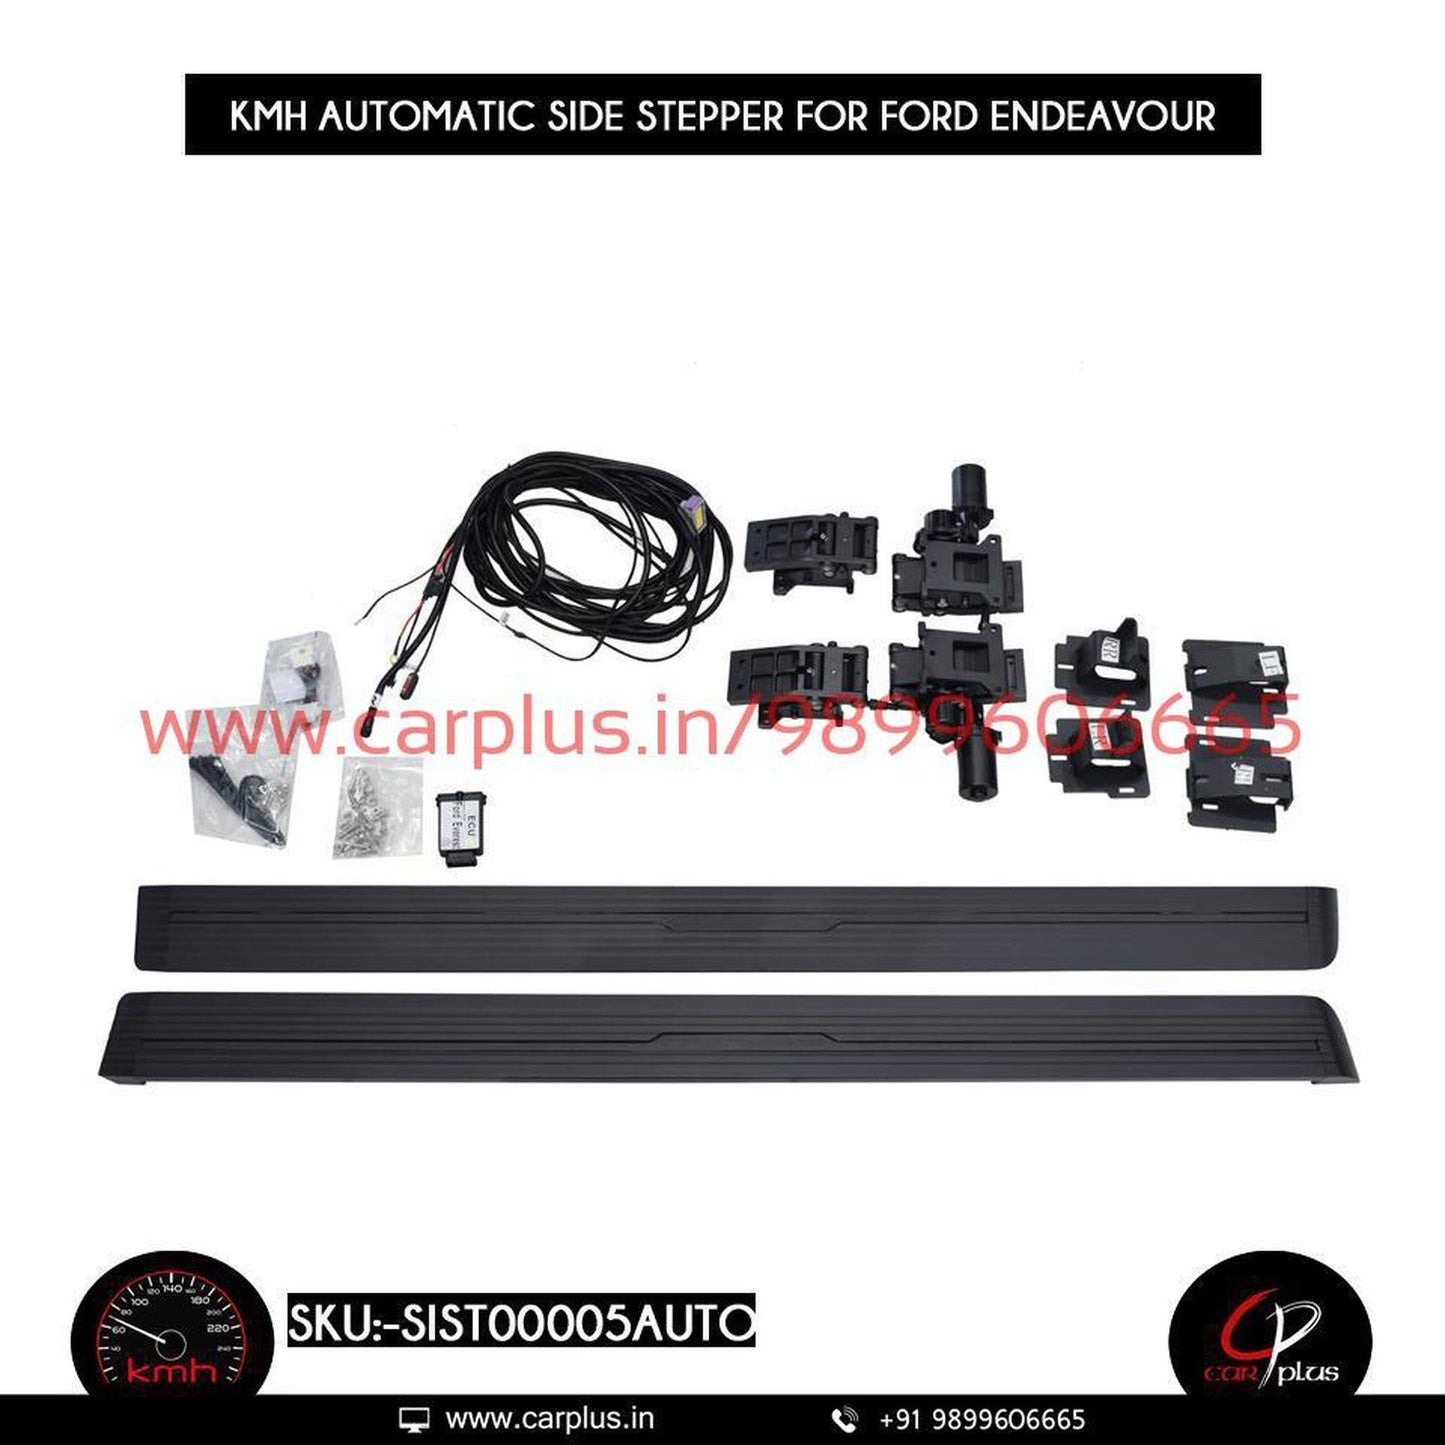 
                  
                    KMH Automatic Side Stepper For Ford Endeavour KMH-SIDE STEPPER AUTOMATIC SIDE STEPPER.
                  
                